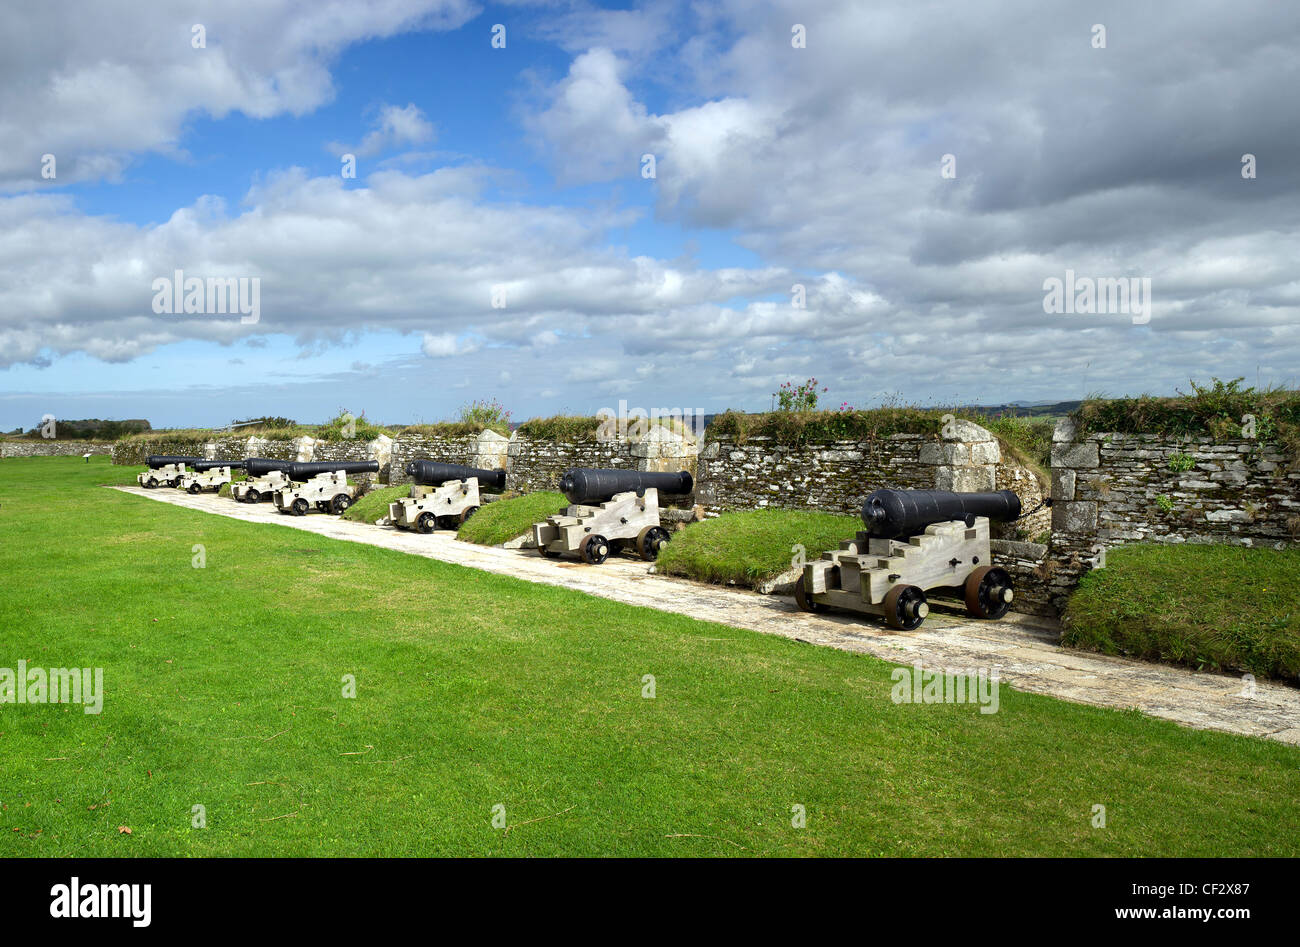 Examples of 18th century and early 19th century cannon of the Nine Gun Battery at Pendennis Castle. Stock Photo